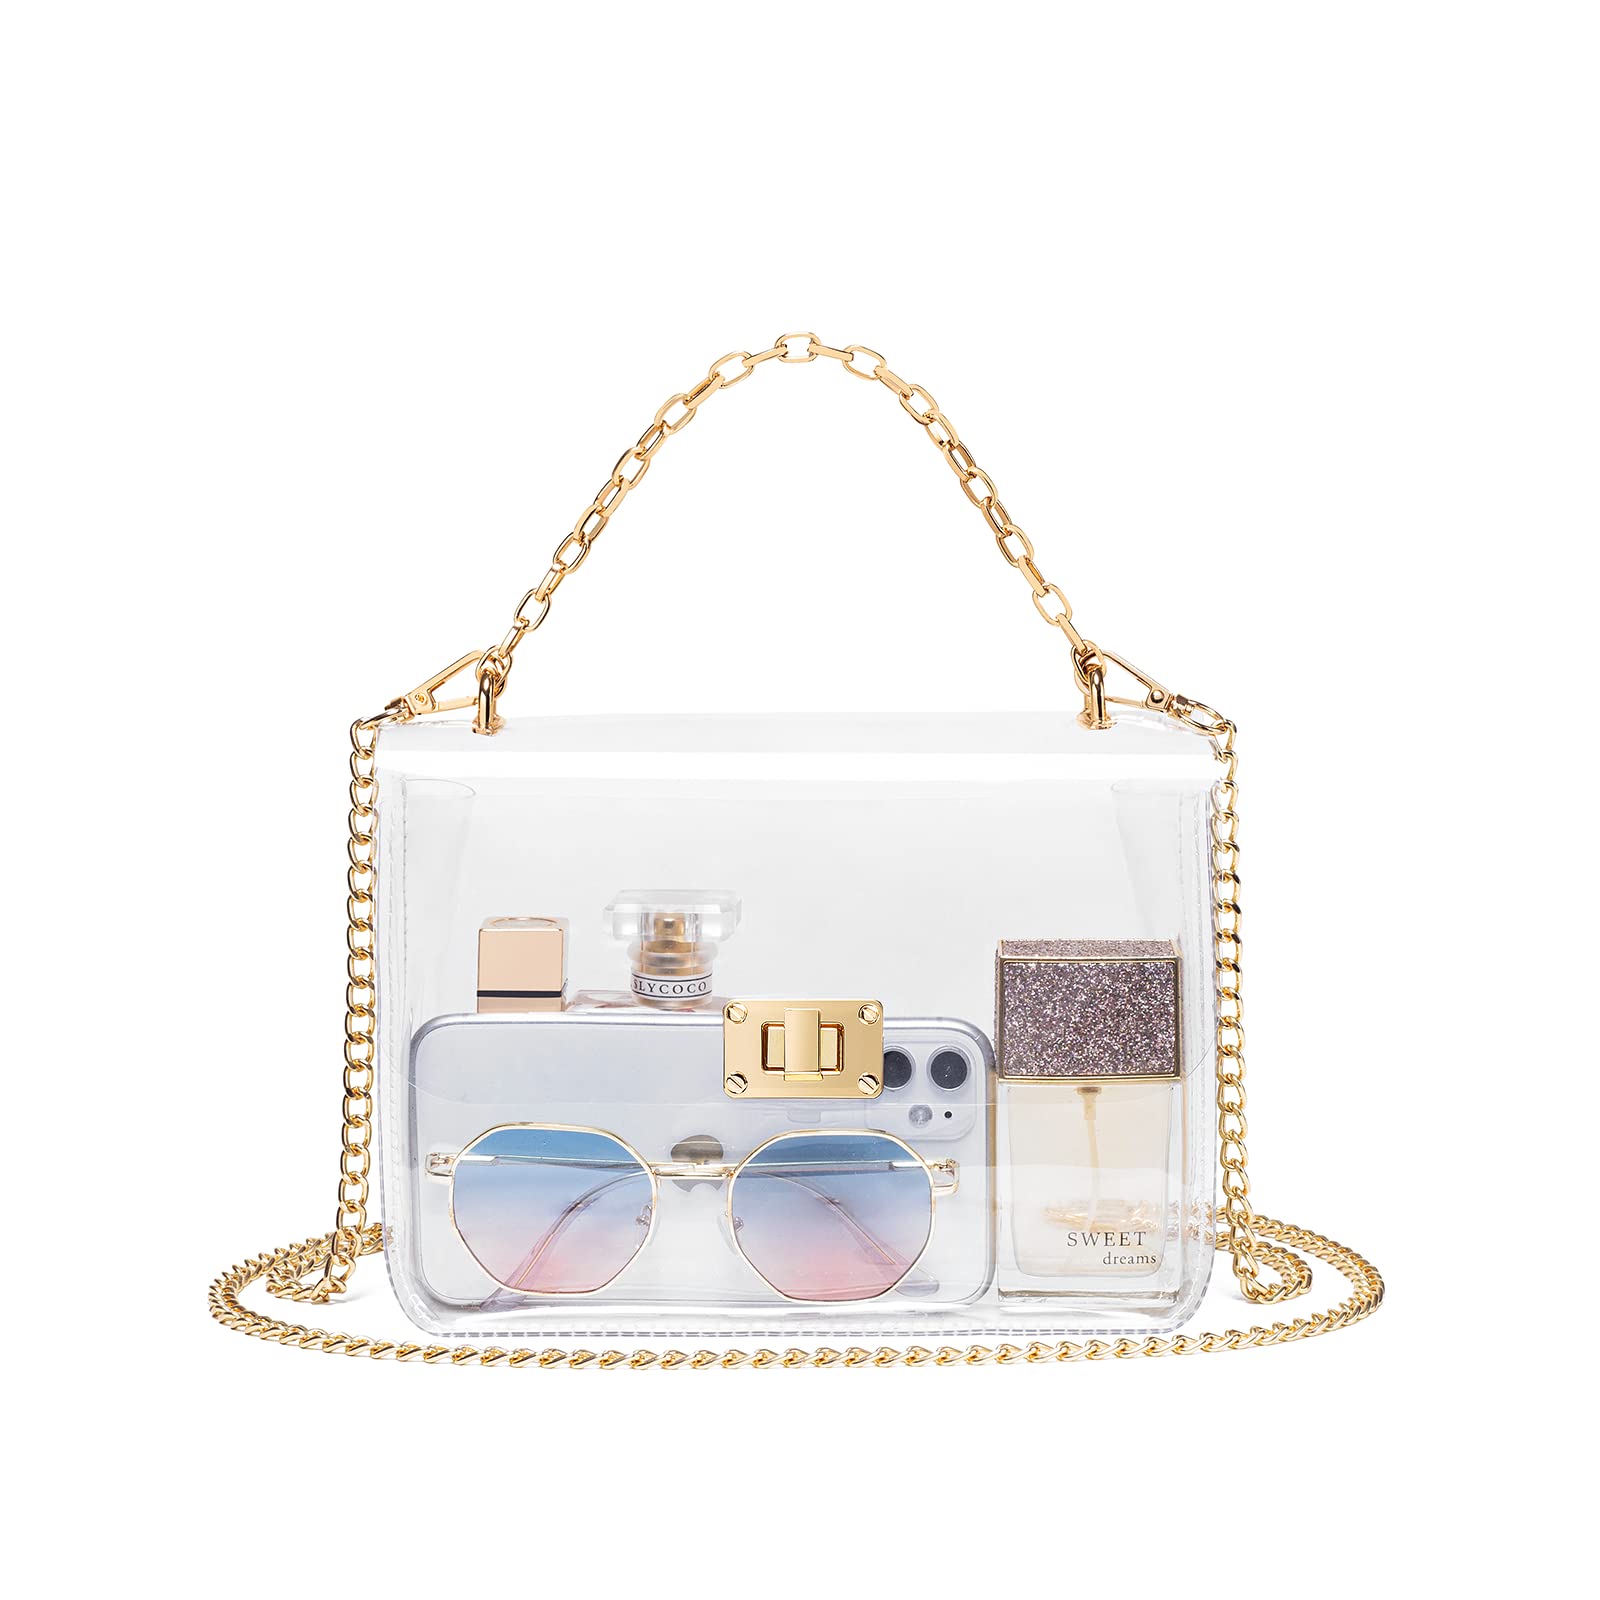 Chic Retro Solid Clear Acrylic Clutch Purse For Women Trendy Round Hard The  Lunch Box Evening Handbag For Parties And Proms From Ao52, $44.98 |  DHgate.Com